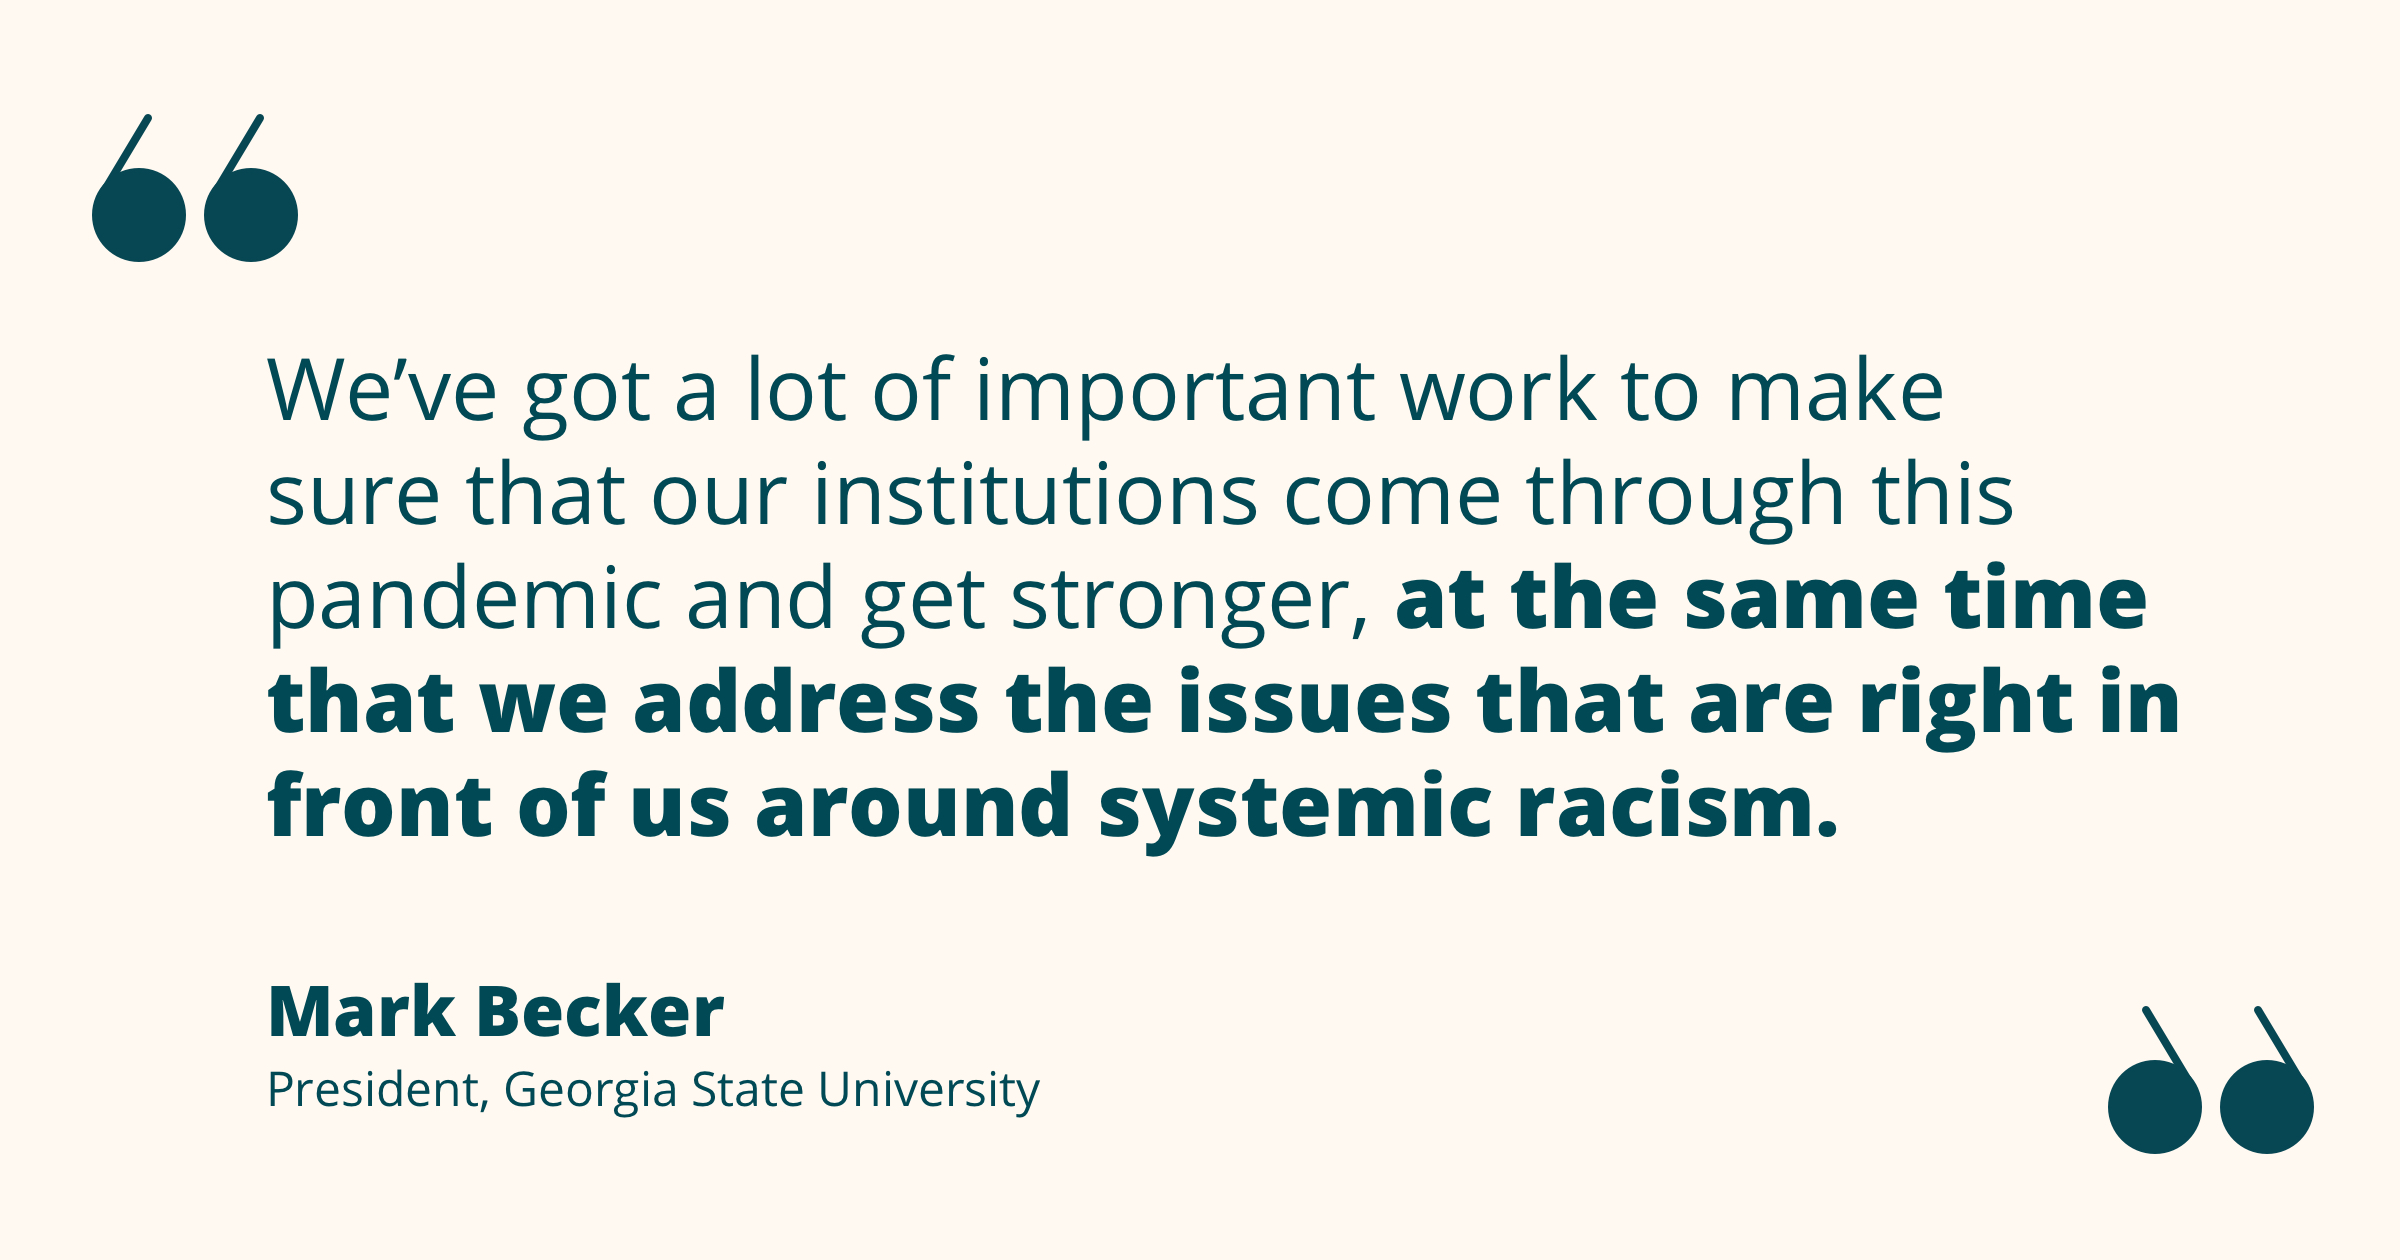 Quote by Mark Becker re: getting institutions through the pandemic while simultaneously addressing systemic racism.